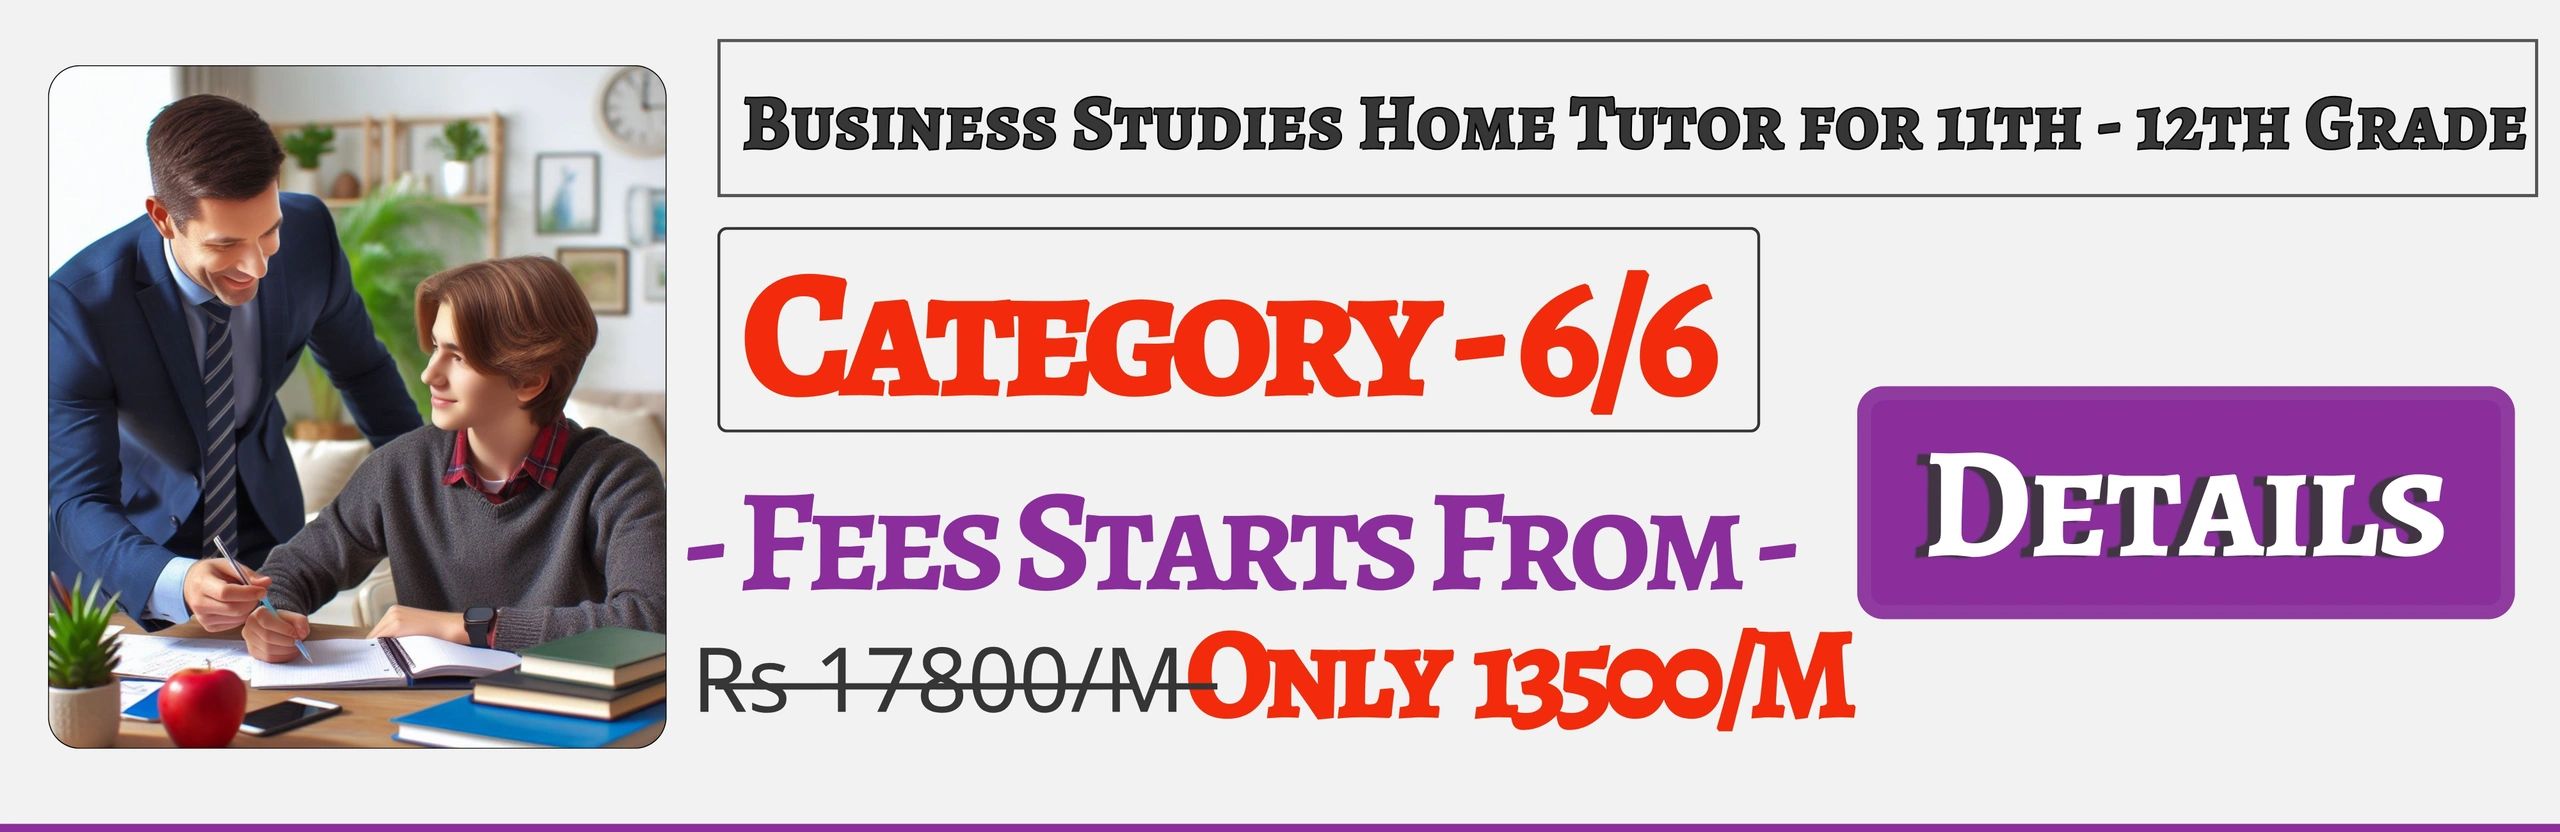 Book Best Nearby Business Studies Home Tuition Tutors For 11th & 12th Jaipur ,Fees Only 13500/M